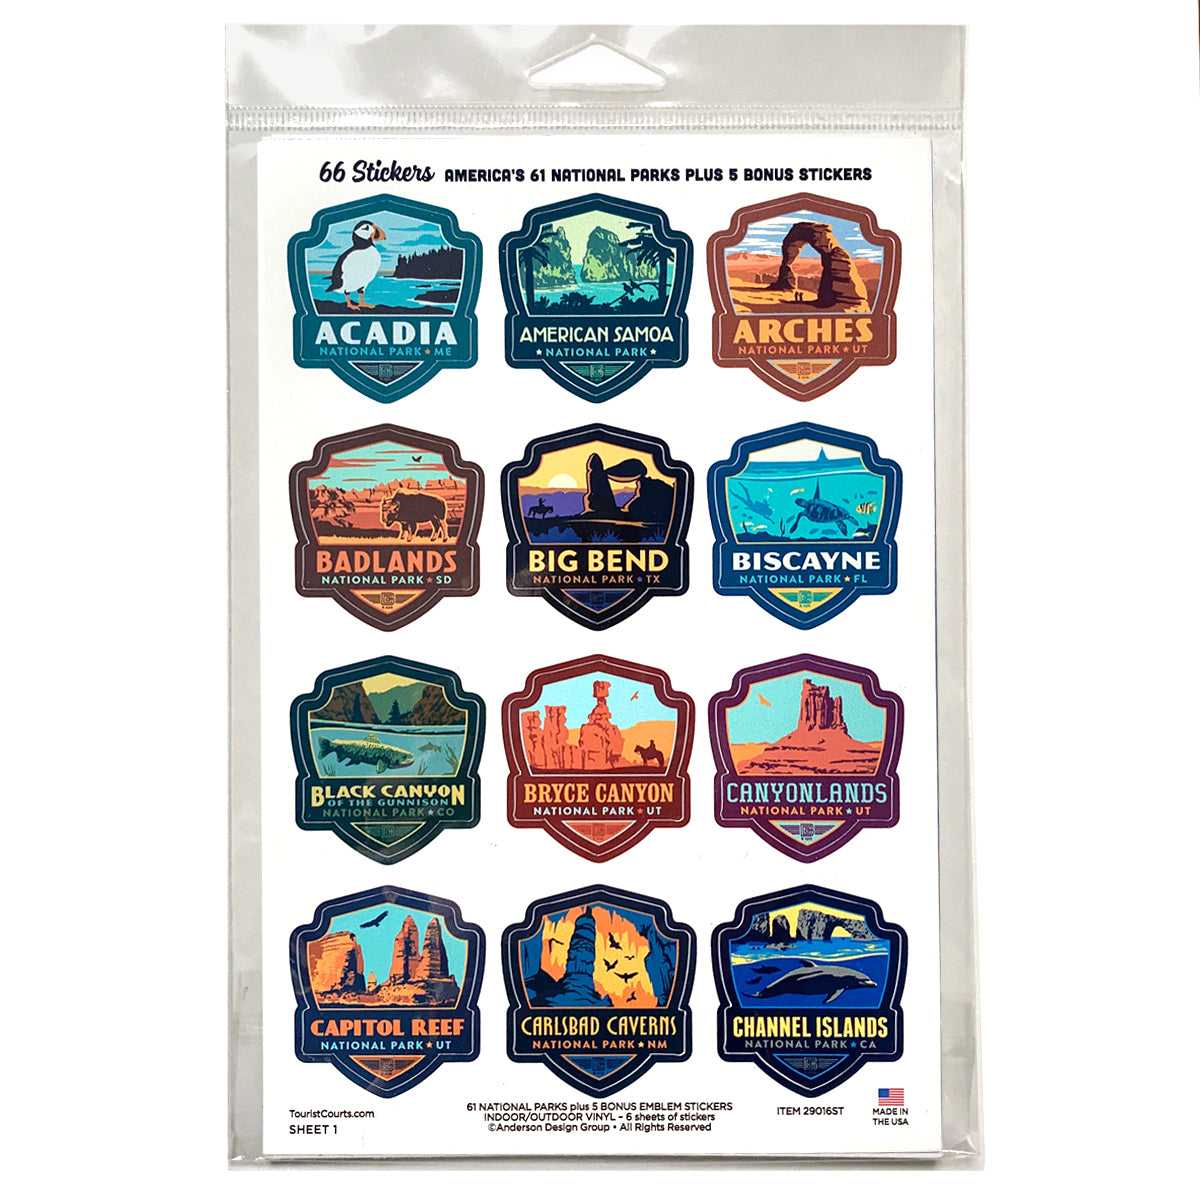 Fifty States Sticker Sheets